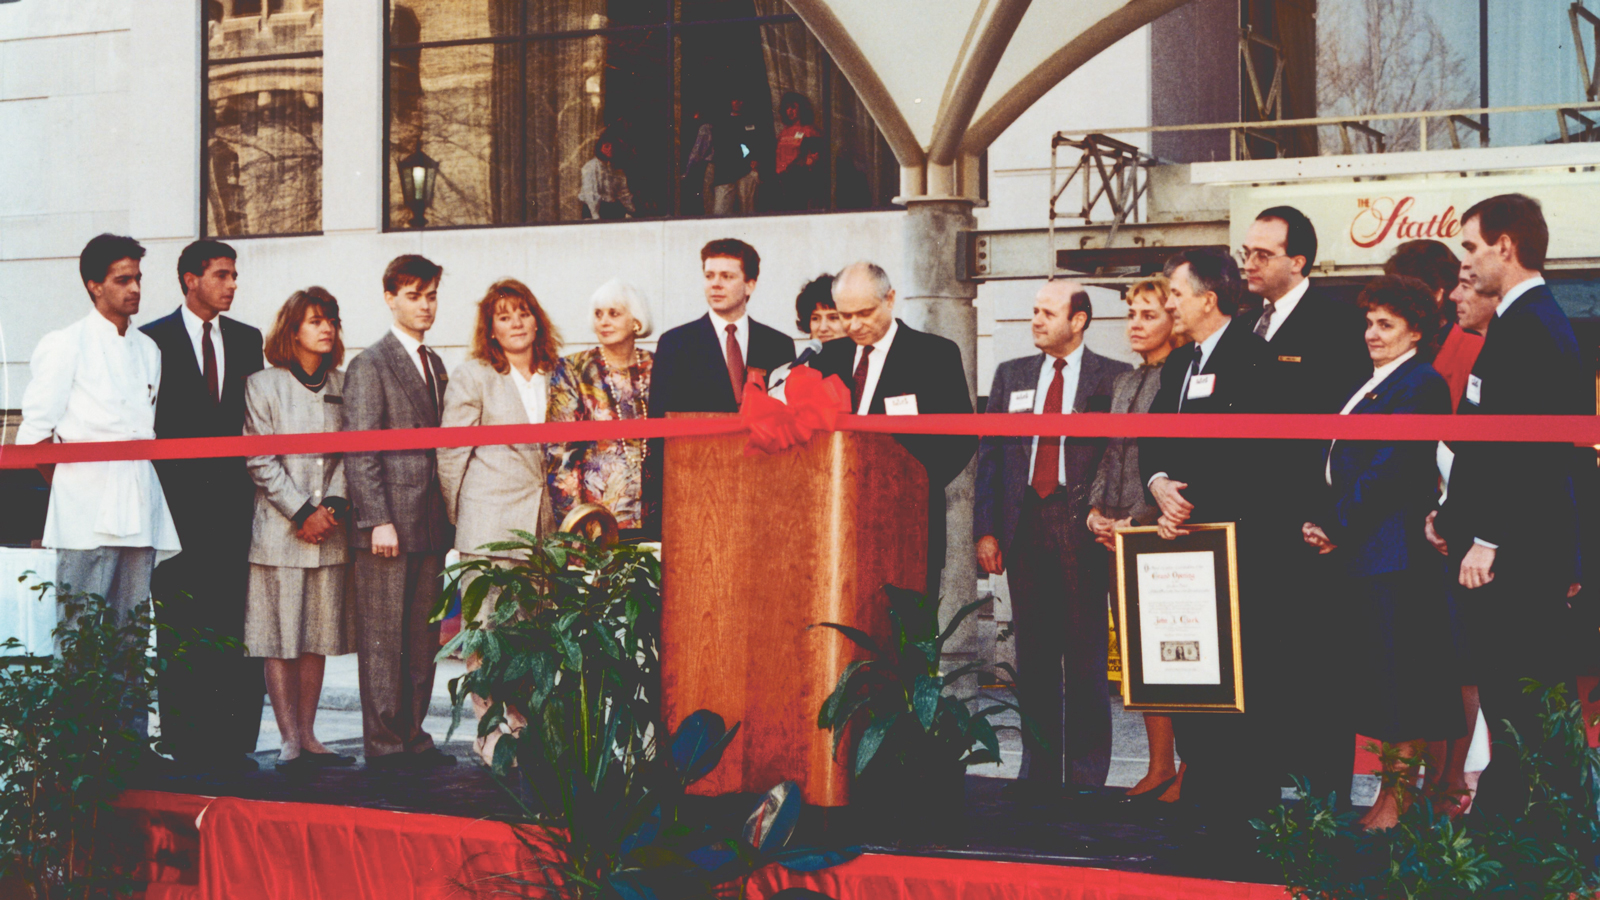 The Statler Hotel and Marriott Executive Education Center’s grand opening, 1989